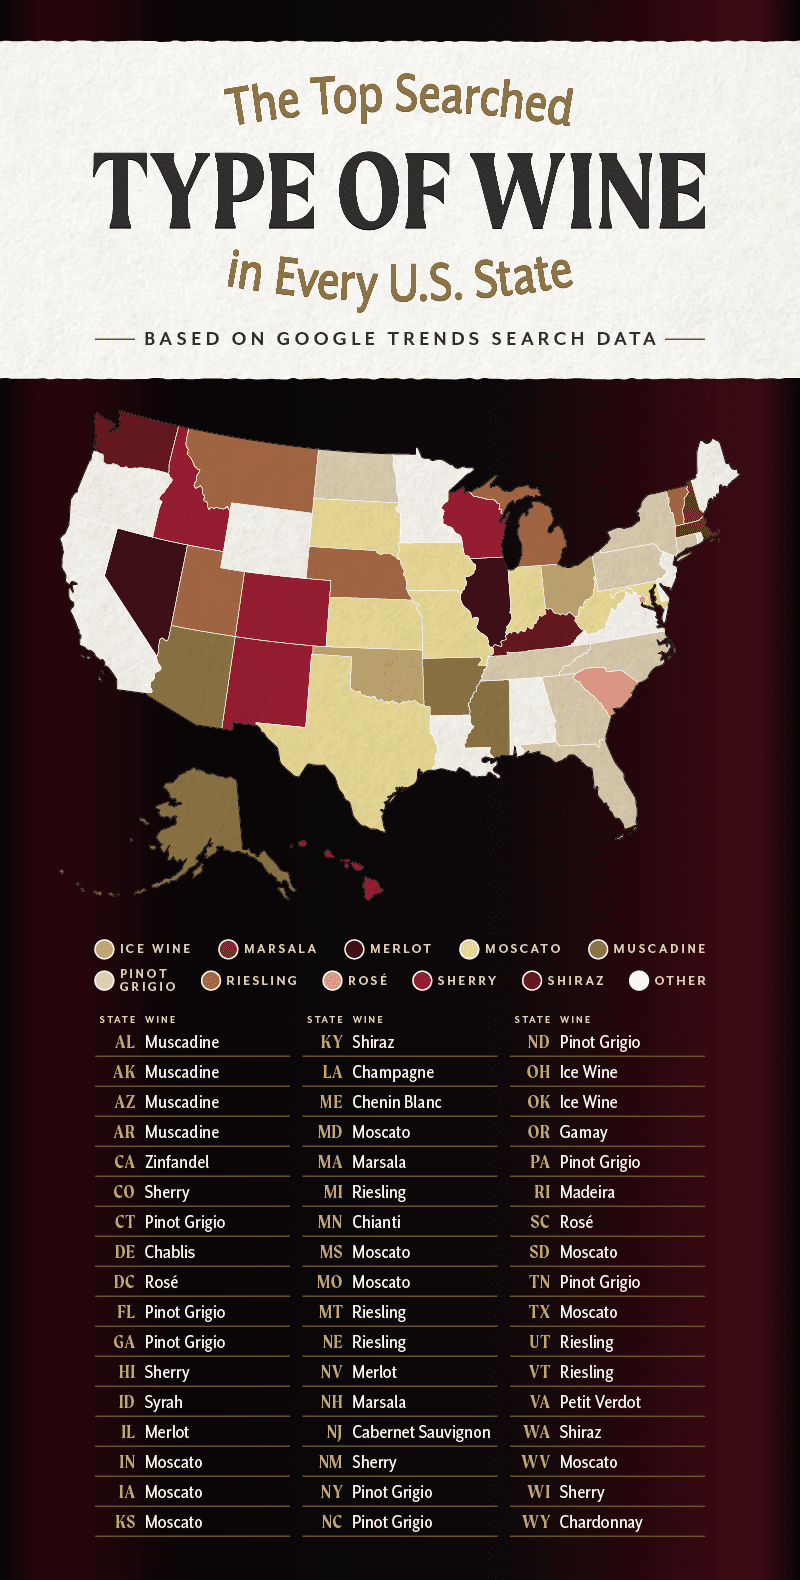 The most popular type of wine in every state